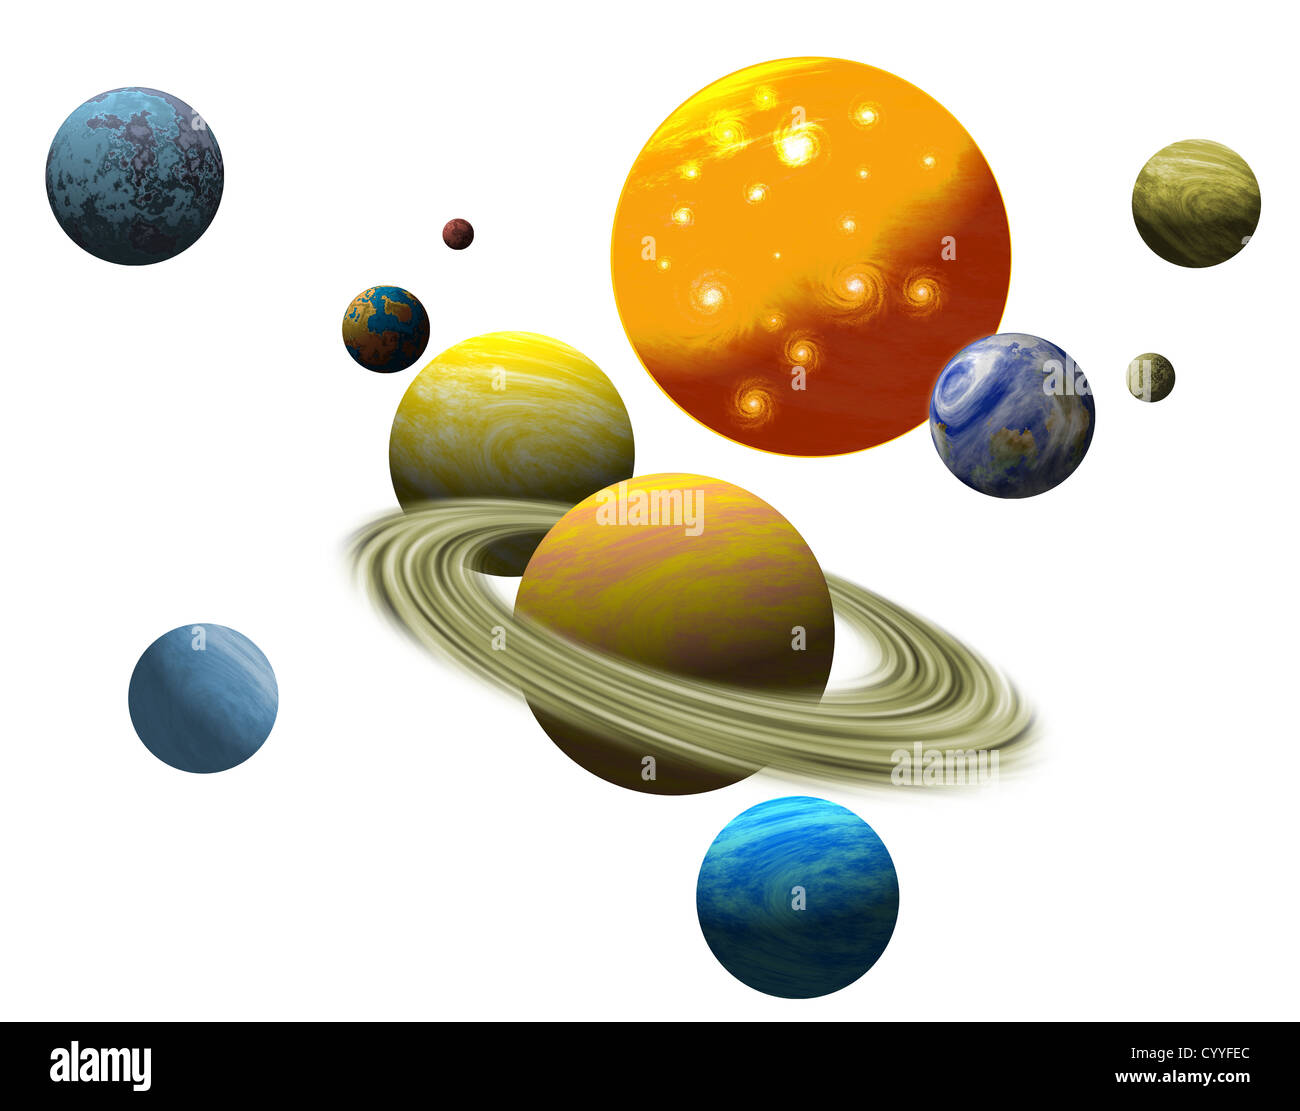 Illustration Of The Solar System Showing The Nine Planets On